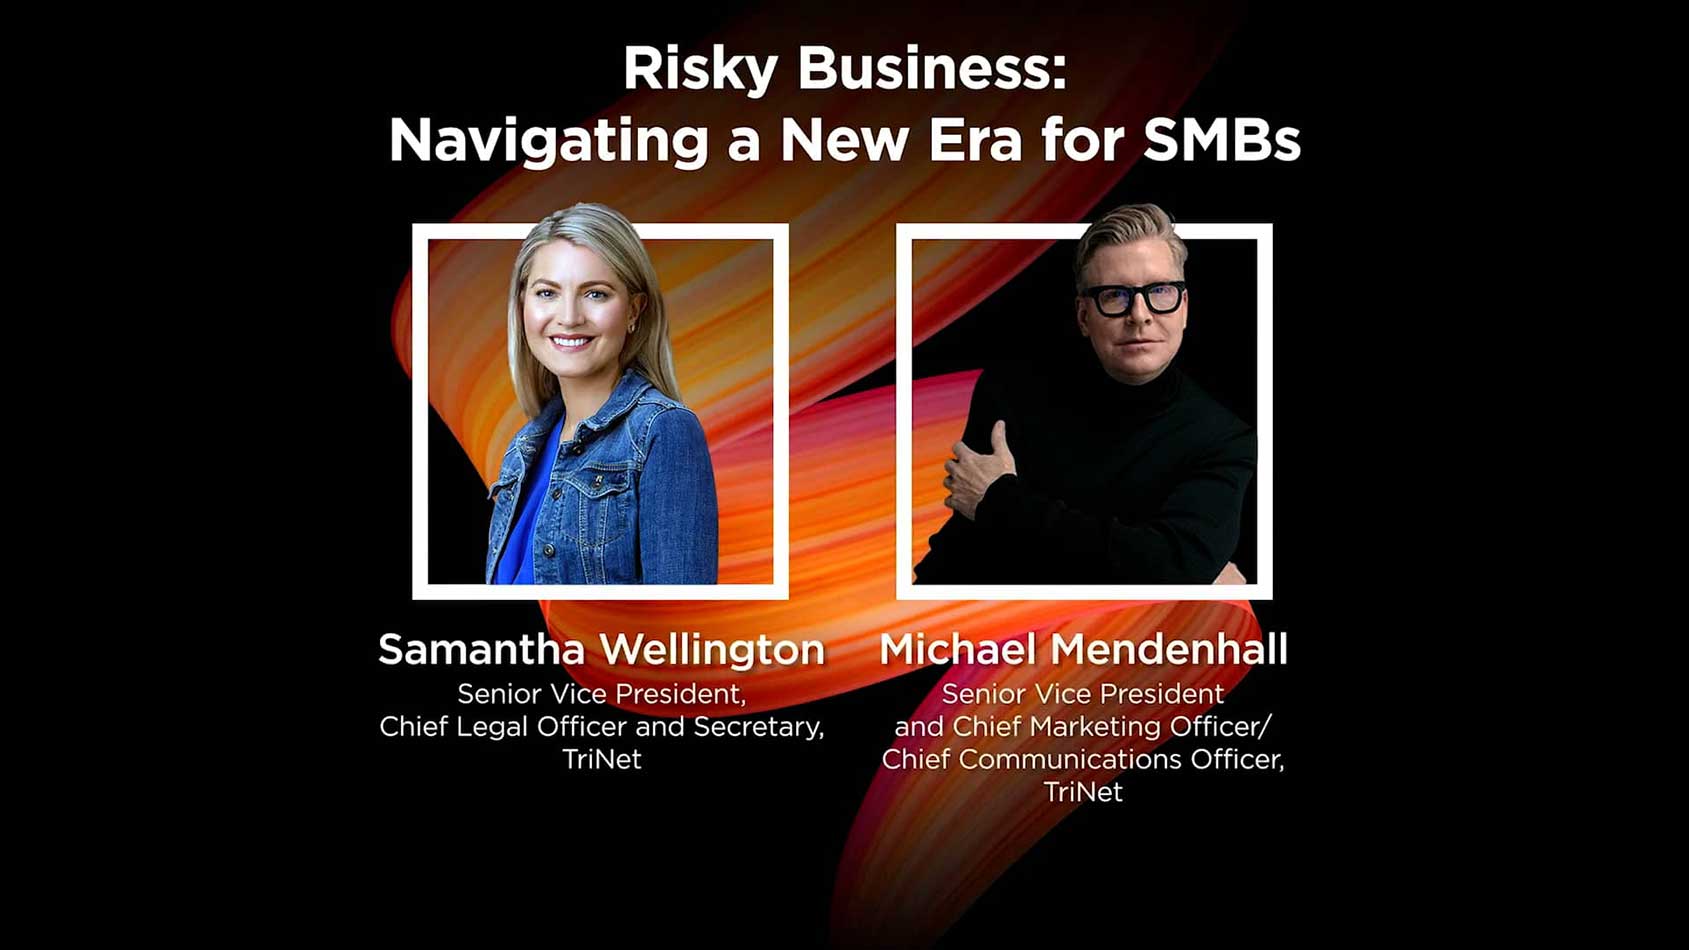 Risky Business: Navigating a New Era for SMBs